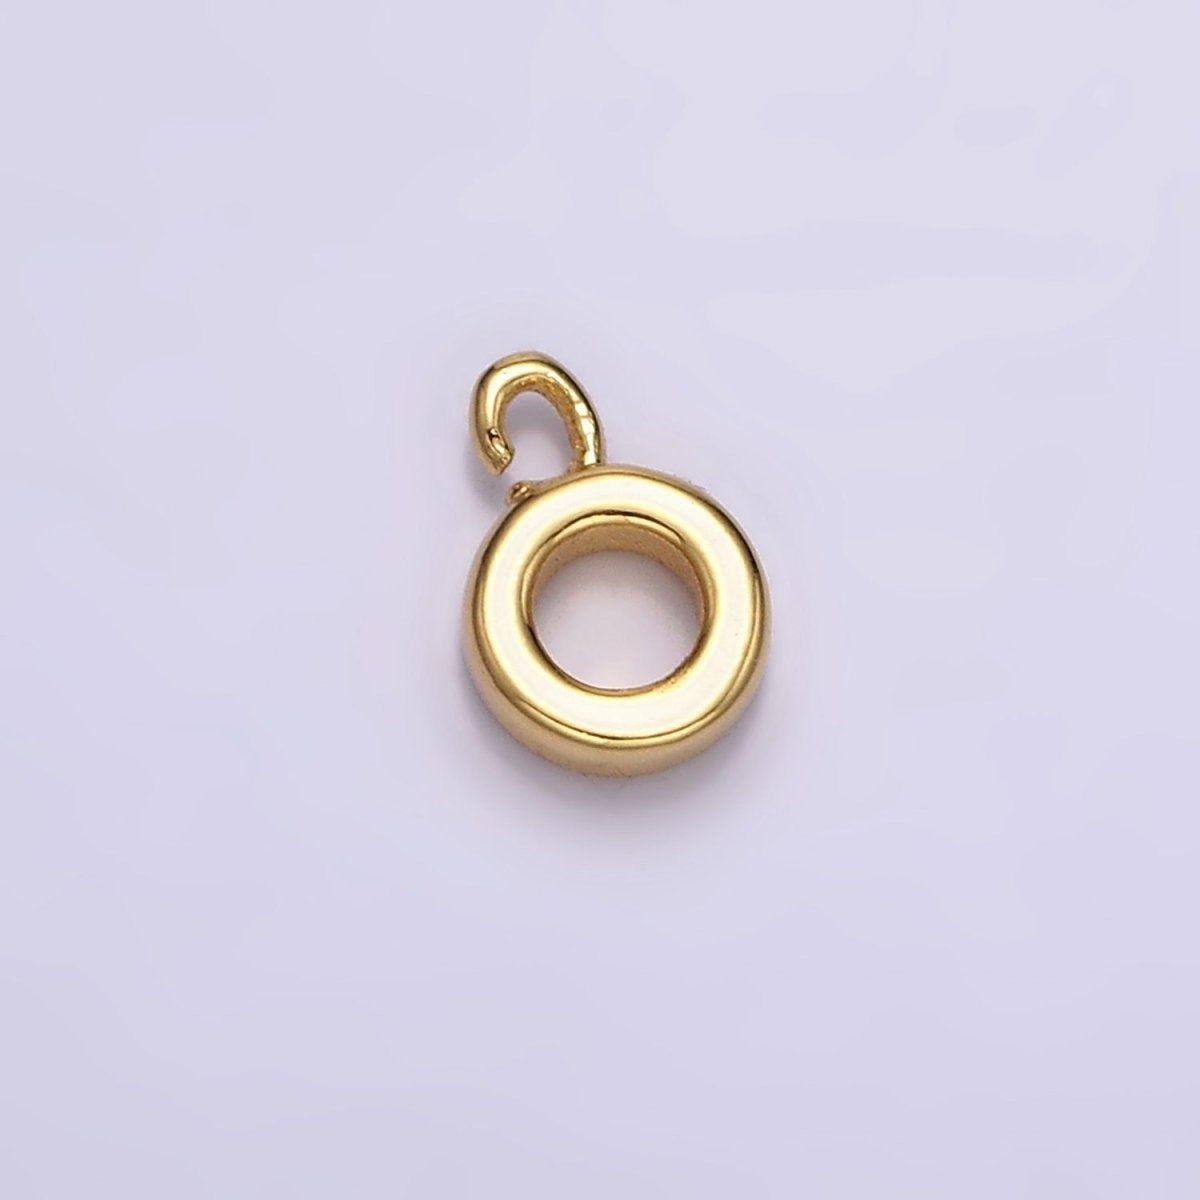 24K Gold Filled 5mm, 6mm Thin Crimp Open Loop Charm Holder Jewelry Making Supply in Gold & Silver | Z-923 - Z-926 - DLUXCA